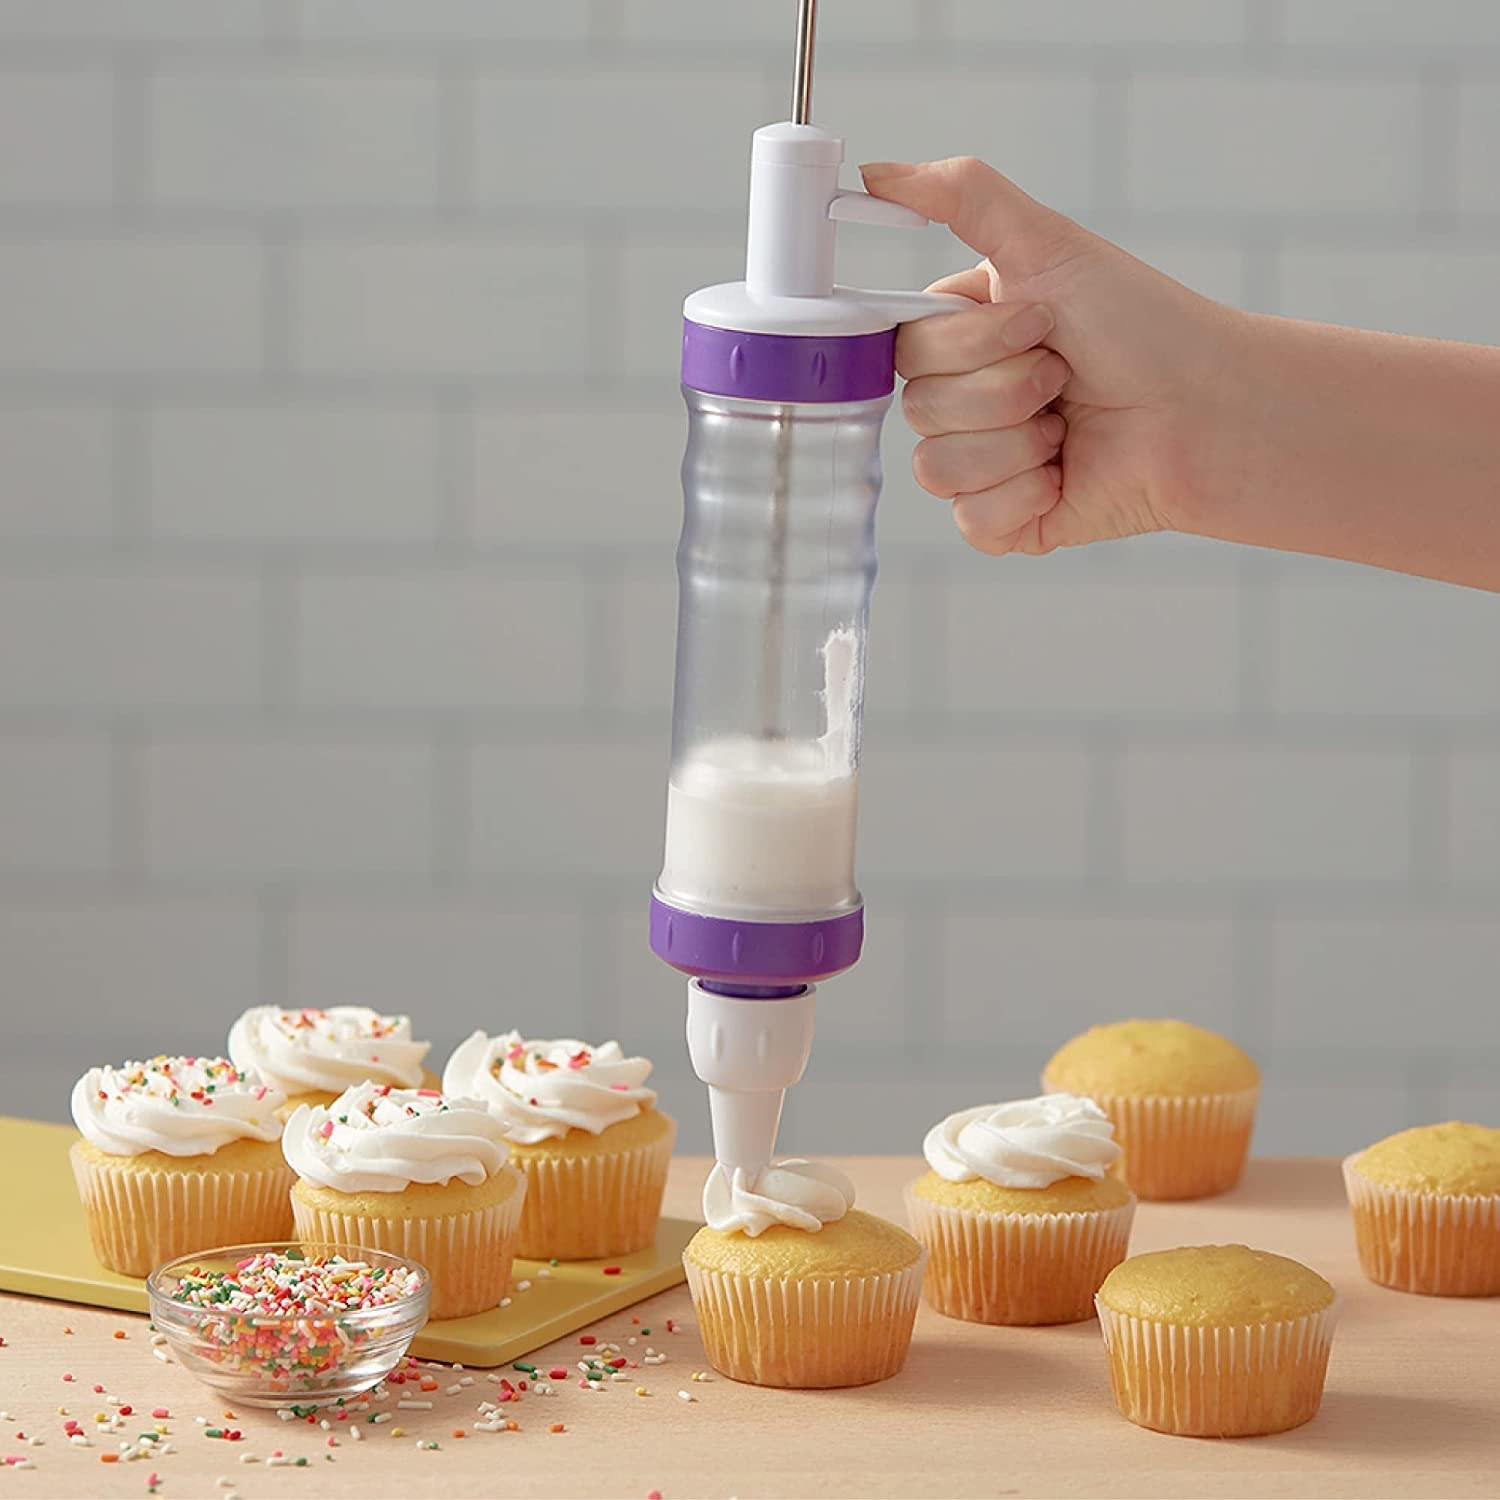 A person using the tool to pipe frosting onto a cupcake